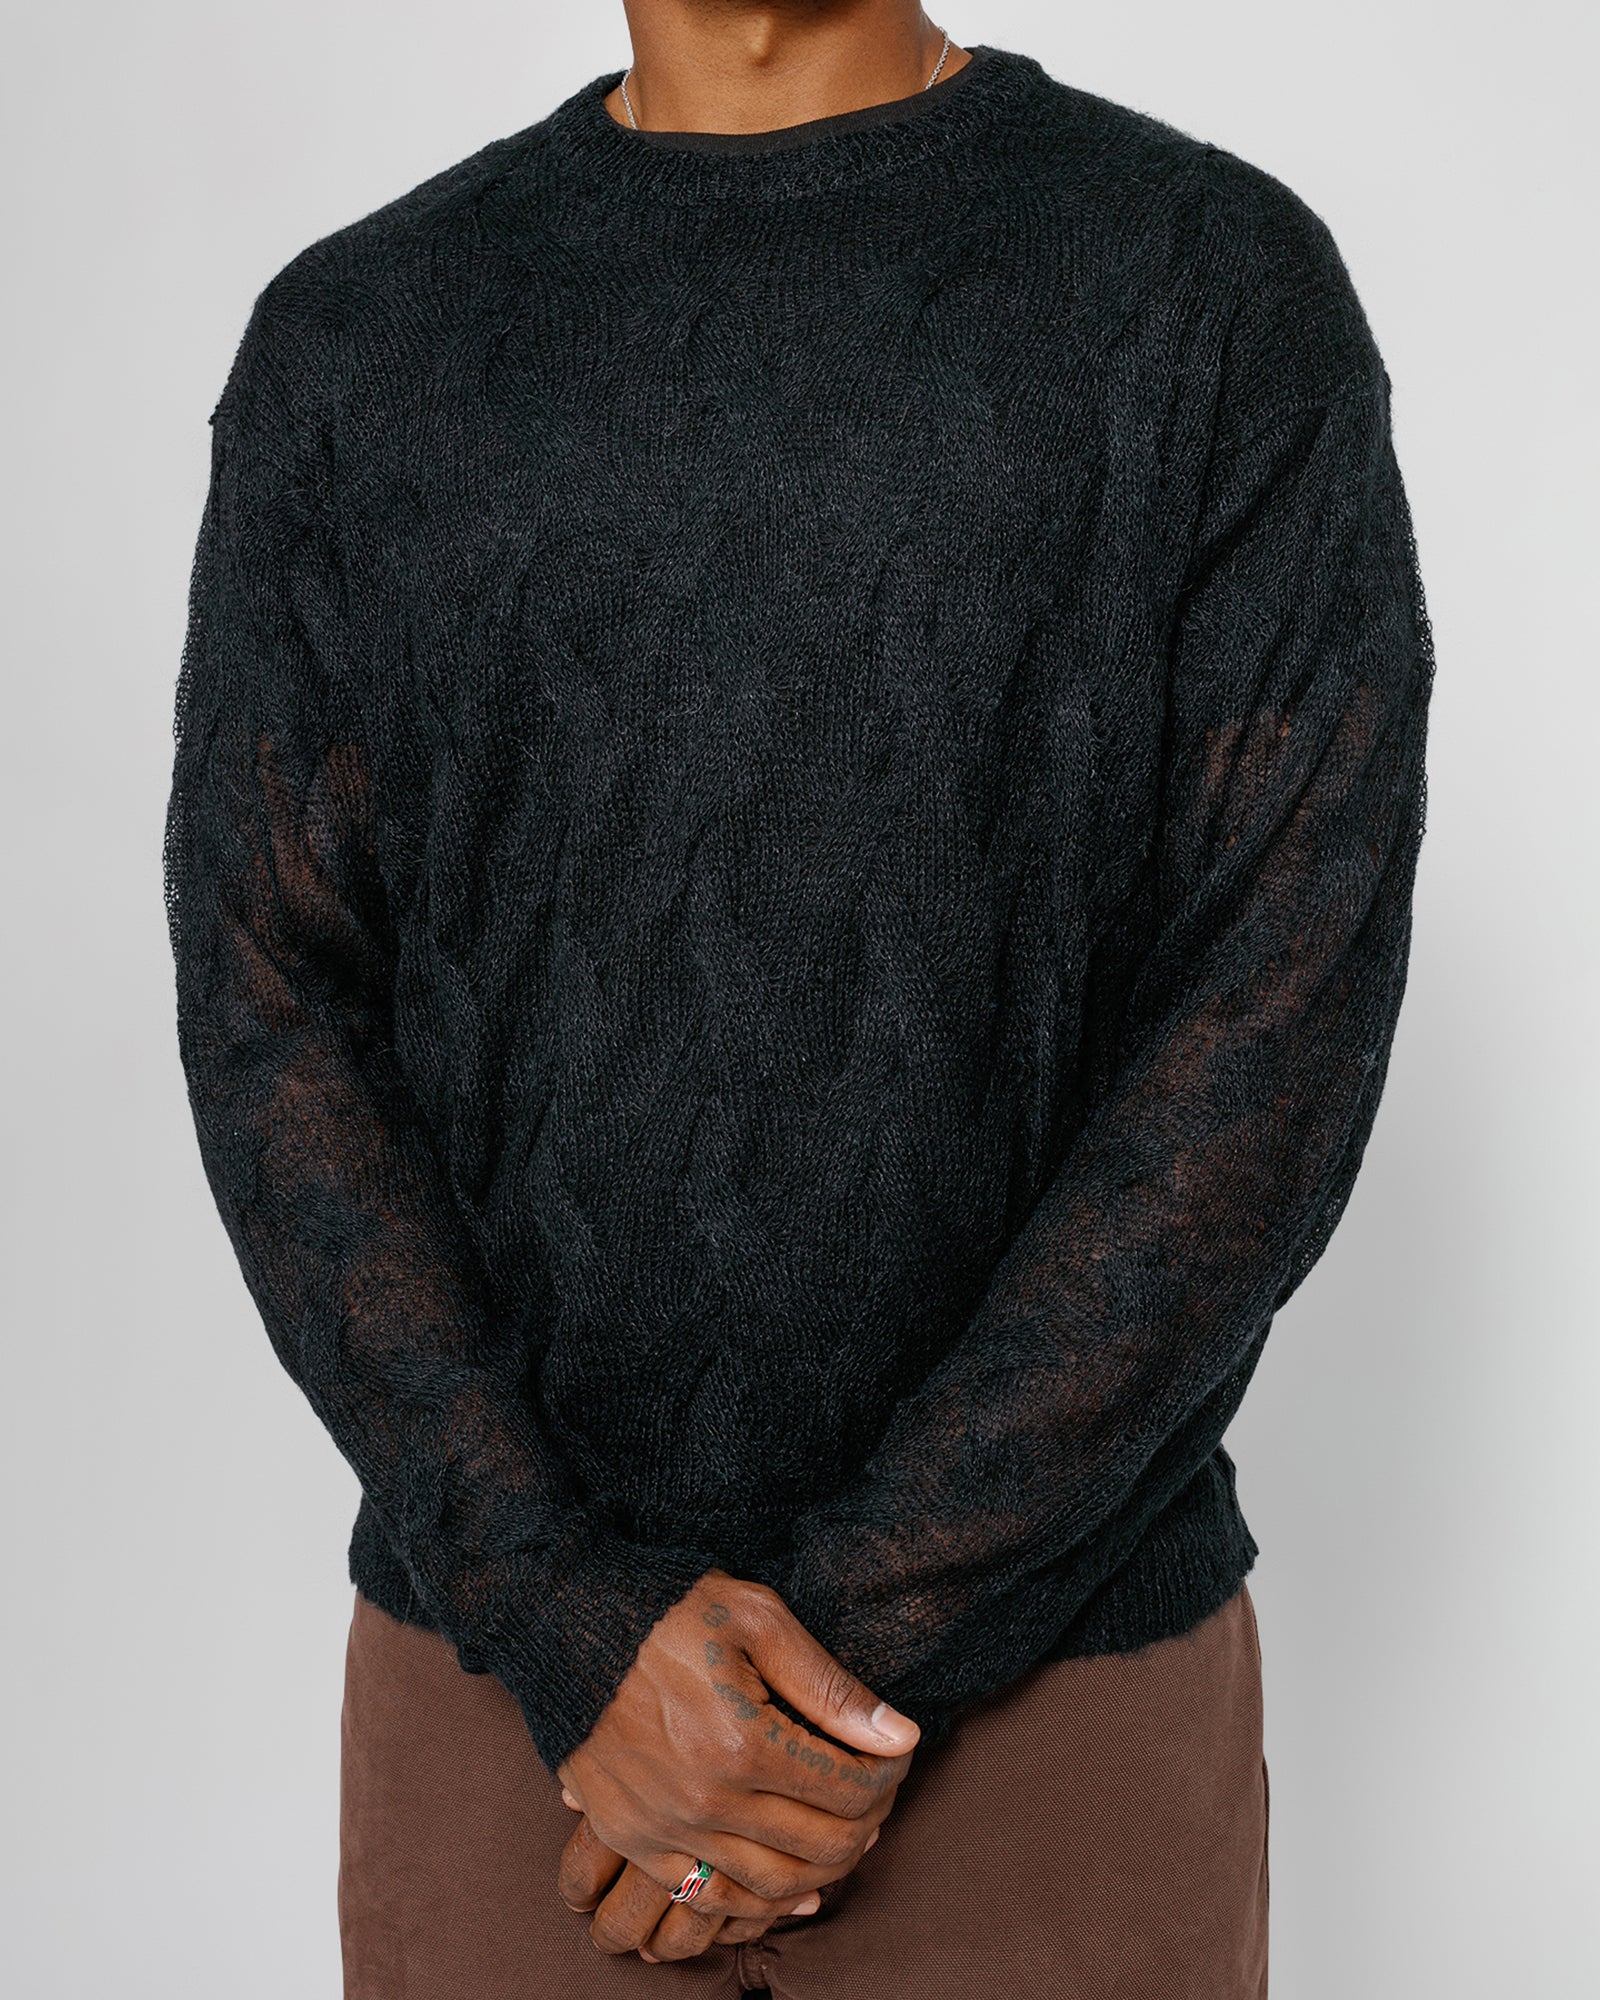 STÜSSY LOOSE KNIT CROSS CABLE SWEATER BLACK SWEATER